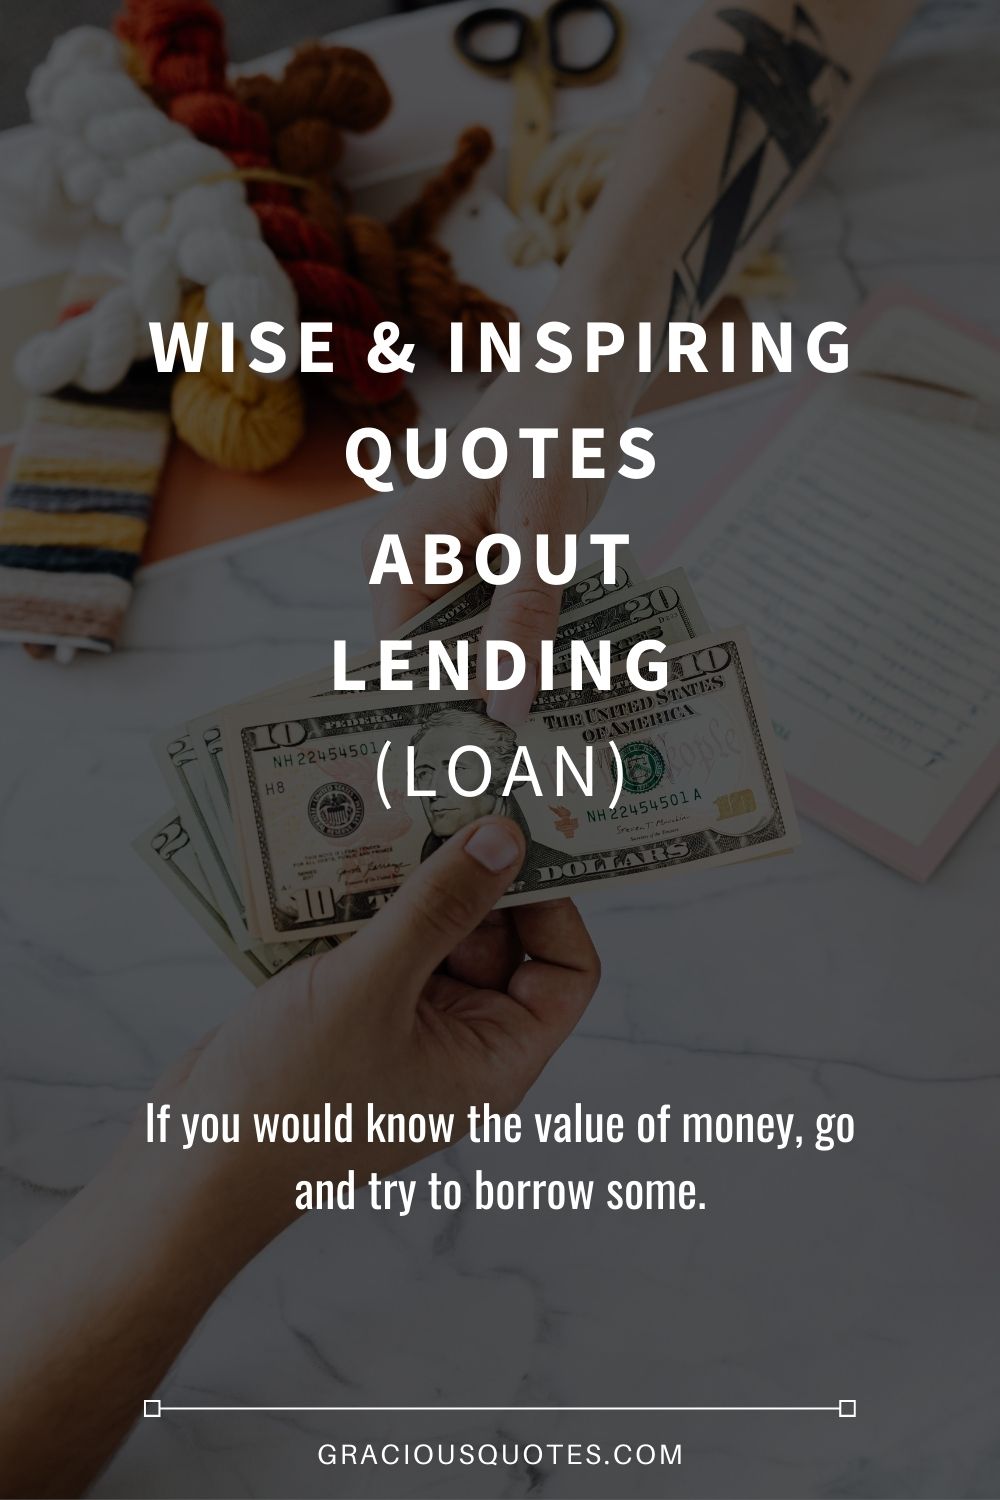 Wise & Inspiring Quotes About Lending (LOAN) - Gracious Quotes